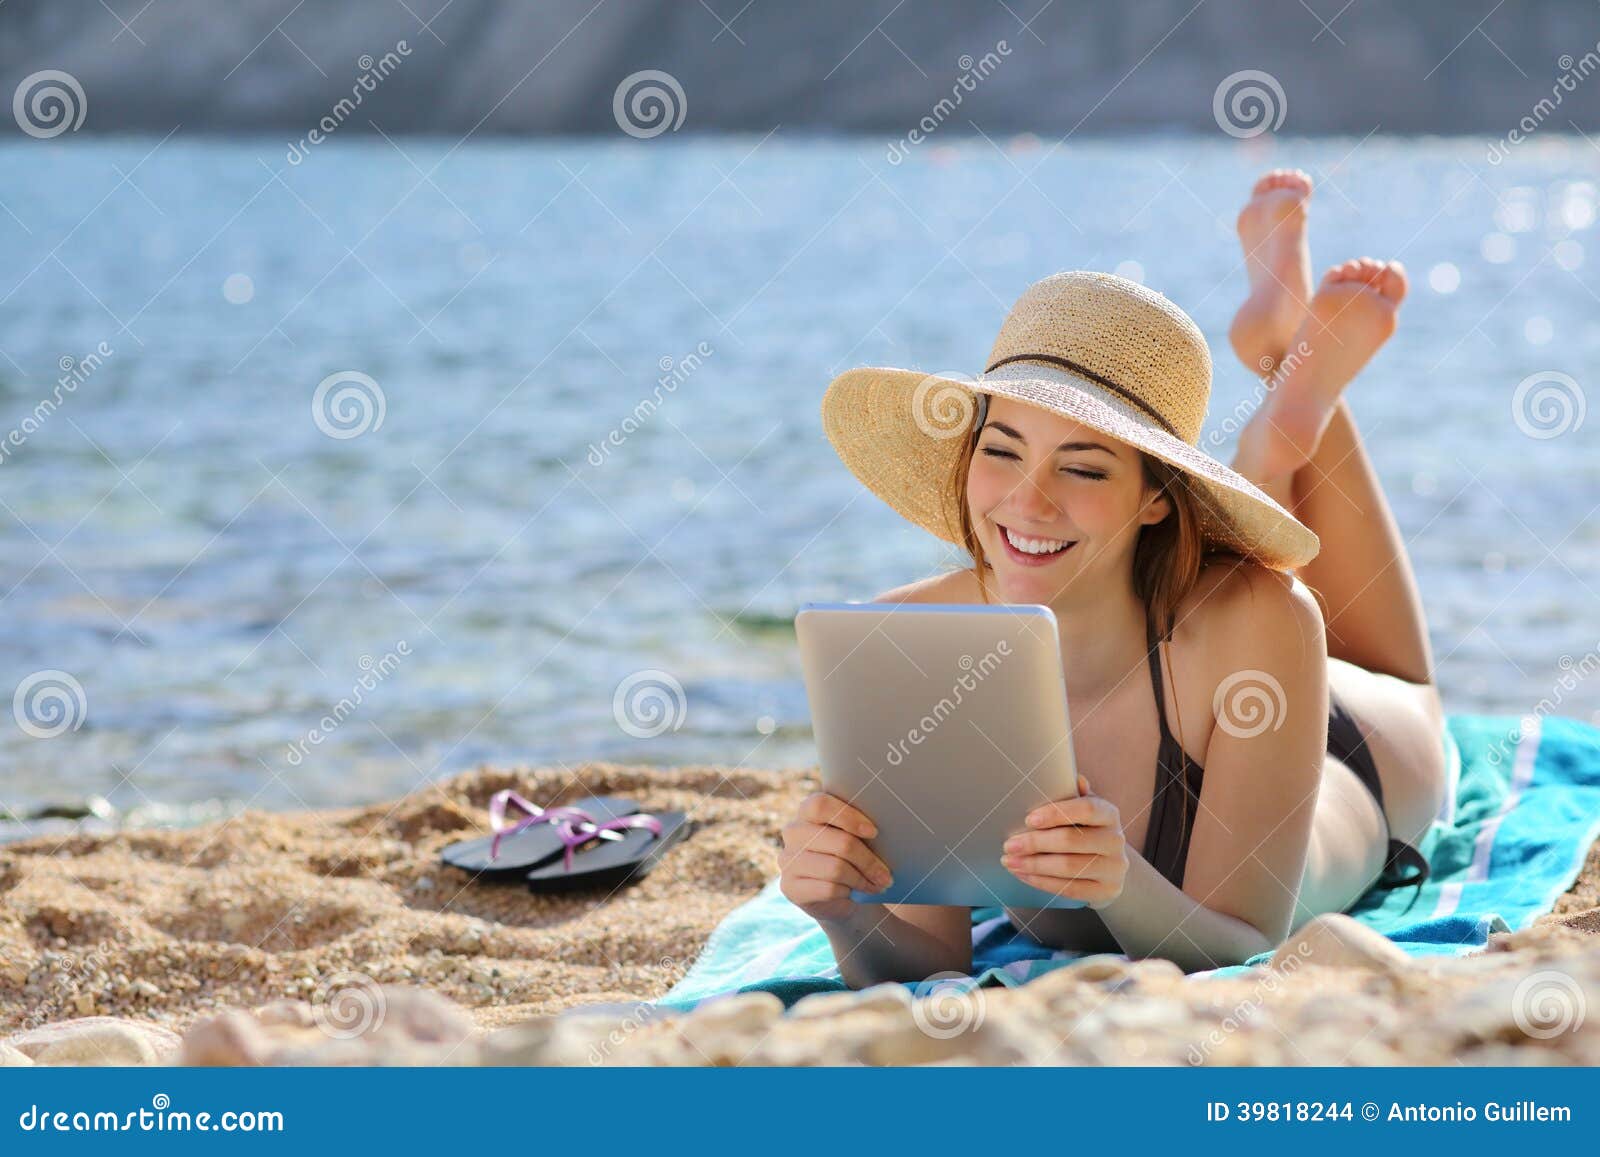 pretty woman reading a tablet reader on the beach on vacations